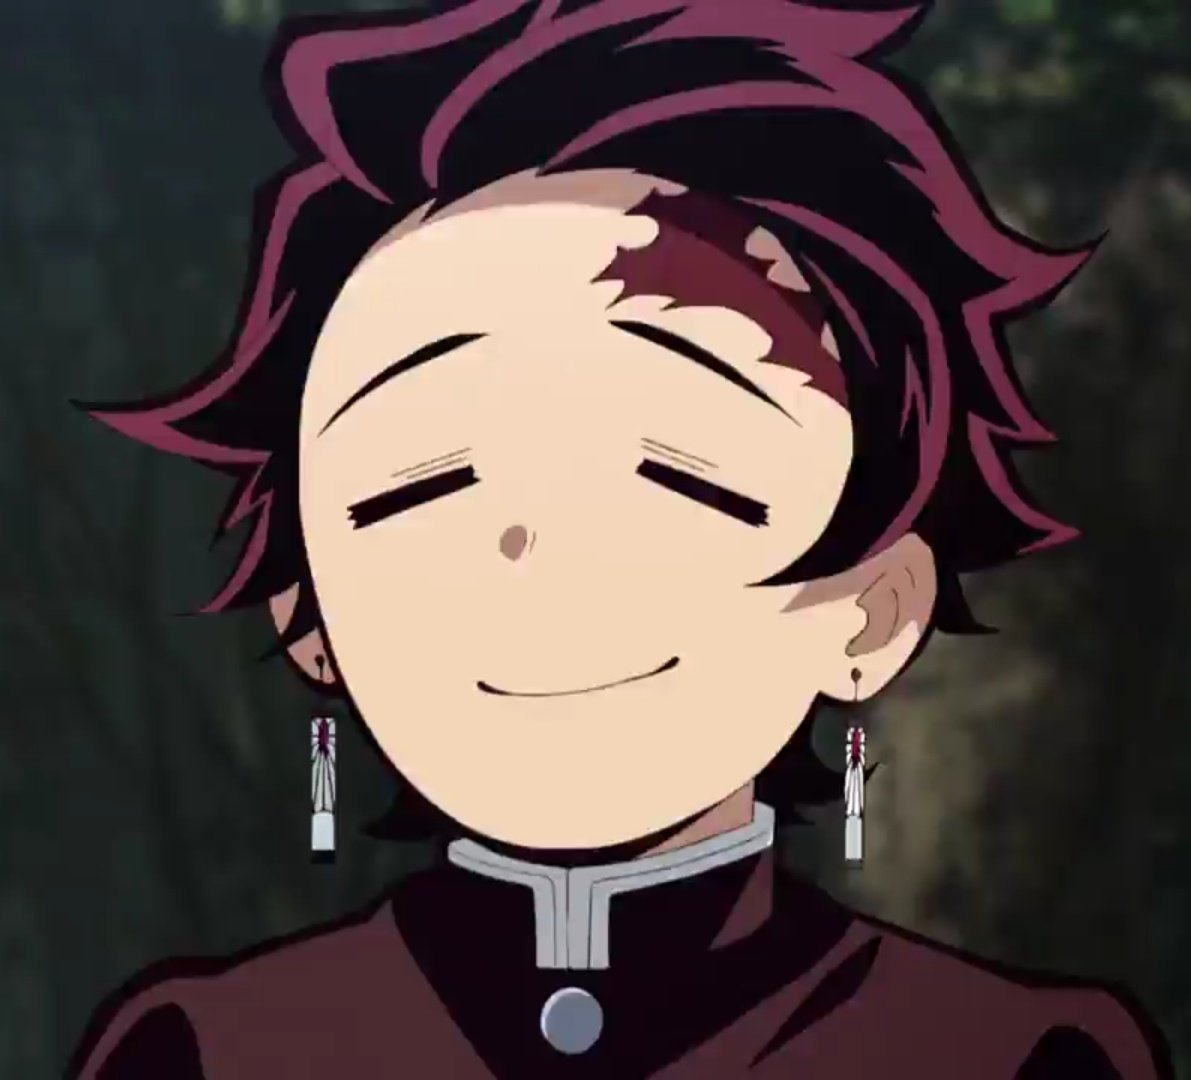 Lemme tell ya, my love for Tanjirou's expressions will never end